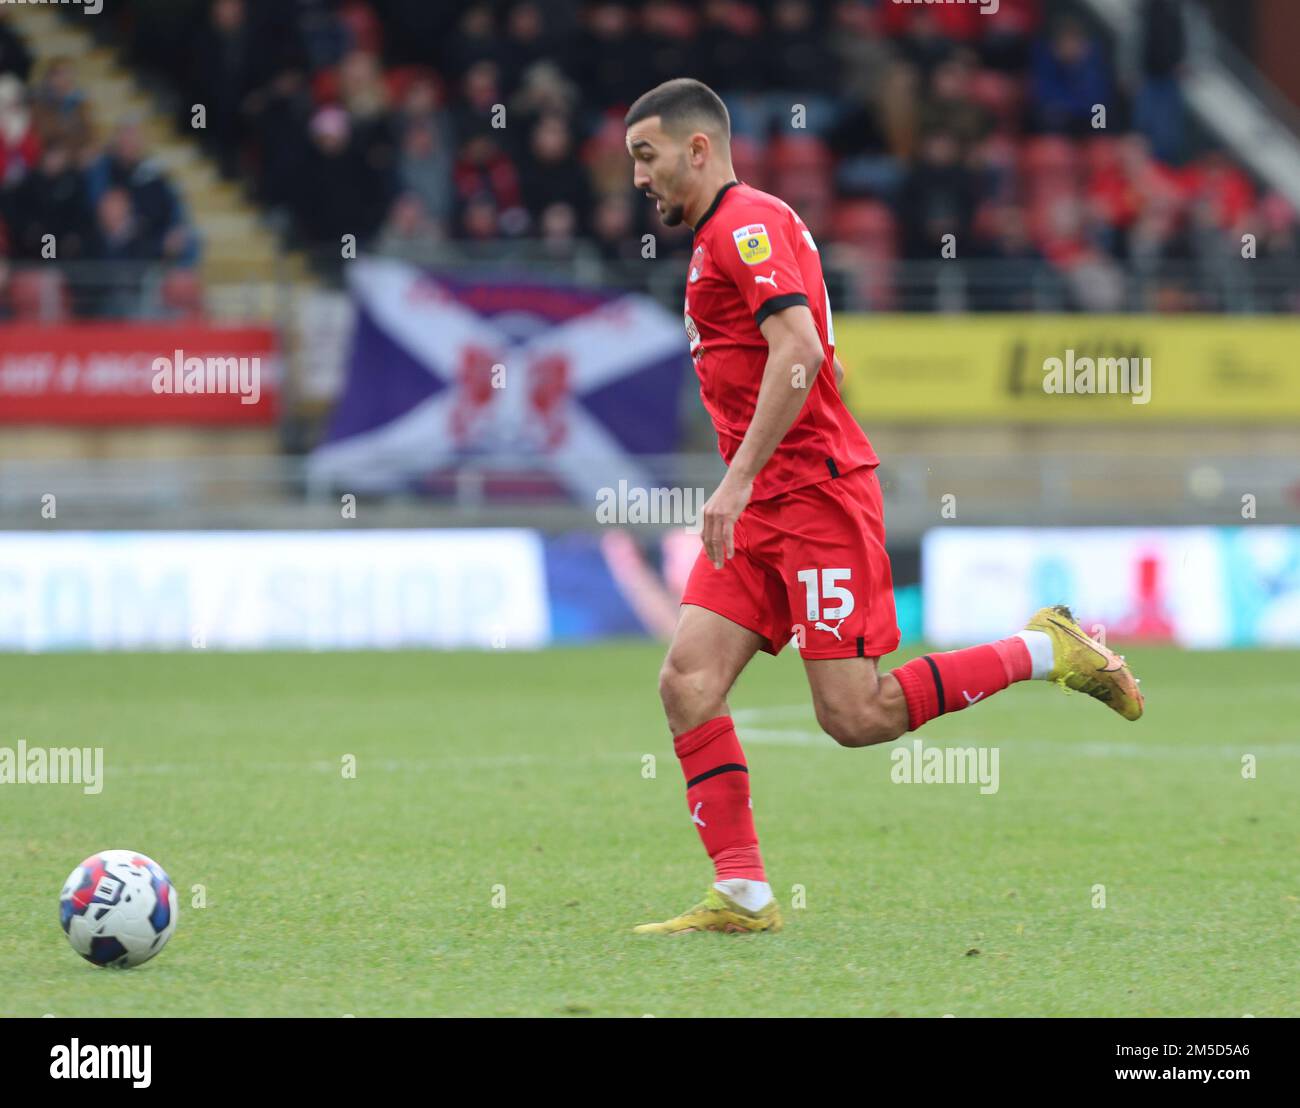 Idris El Mizouni (on loan from Ipswich Town) of Leyton Orient during League Two soccer match between Leyton Orient against Stevenage at Brisbane Road Stock Photo